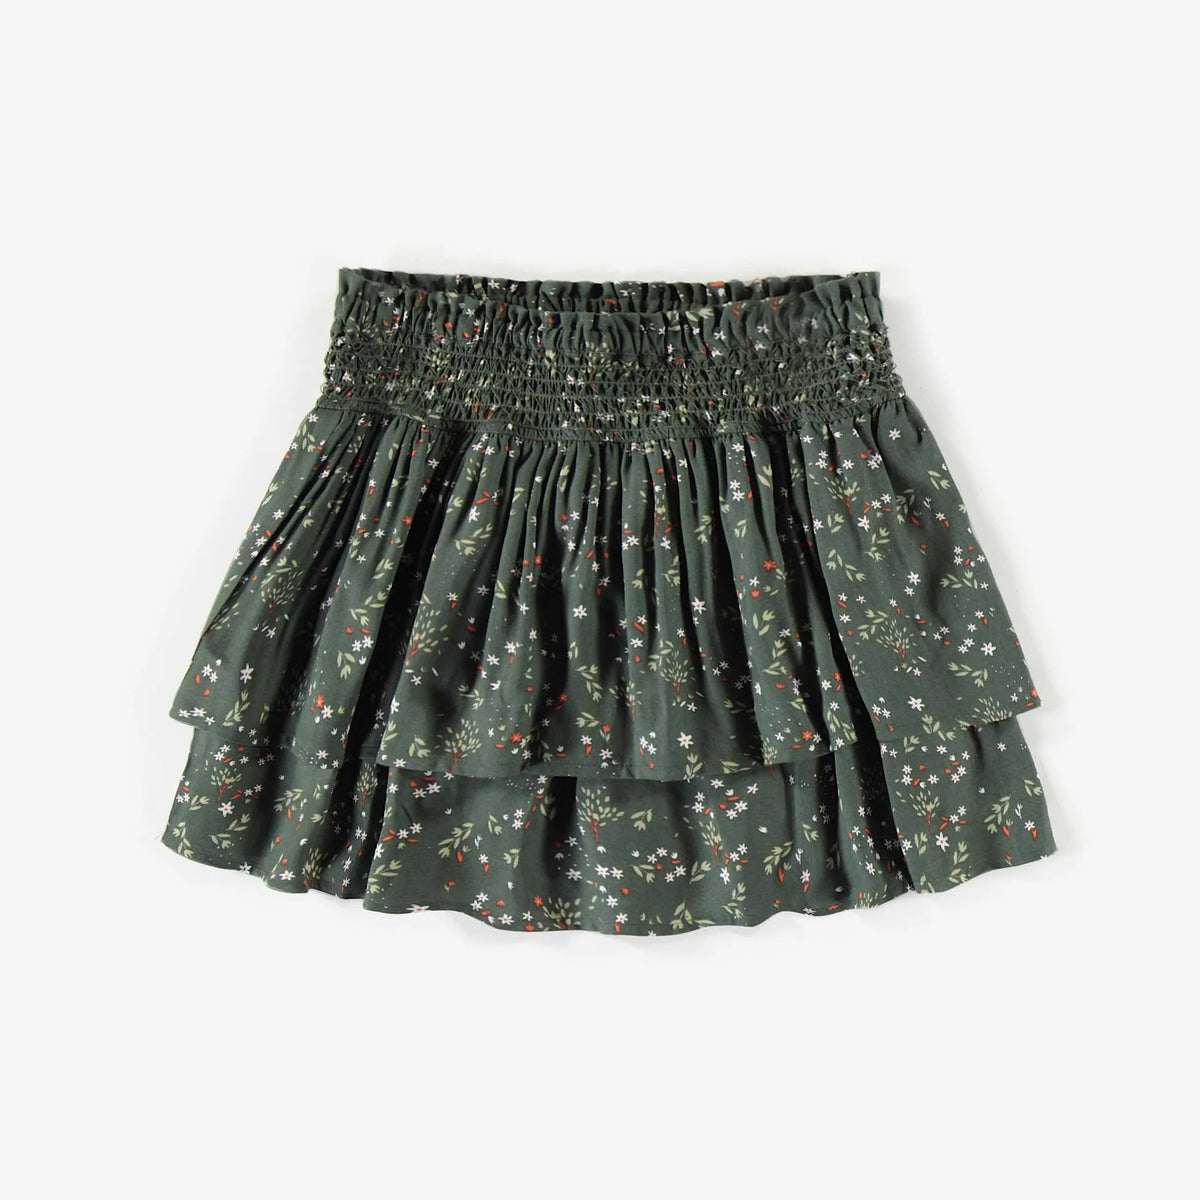 Floral Green Skirt with Ruffles